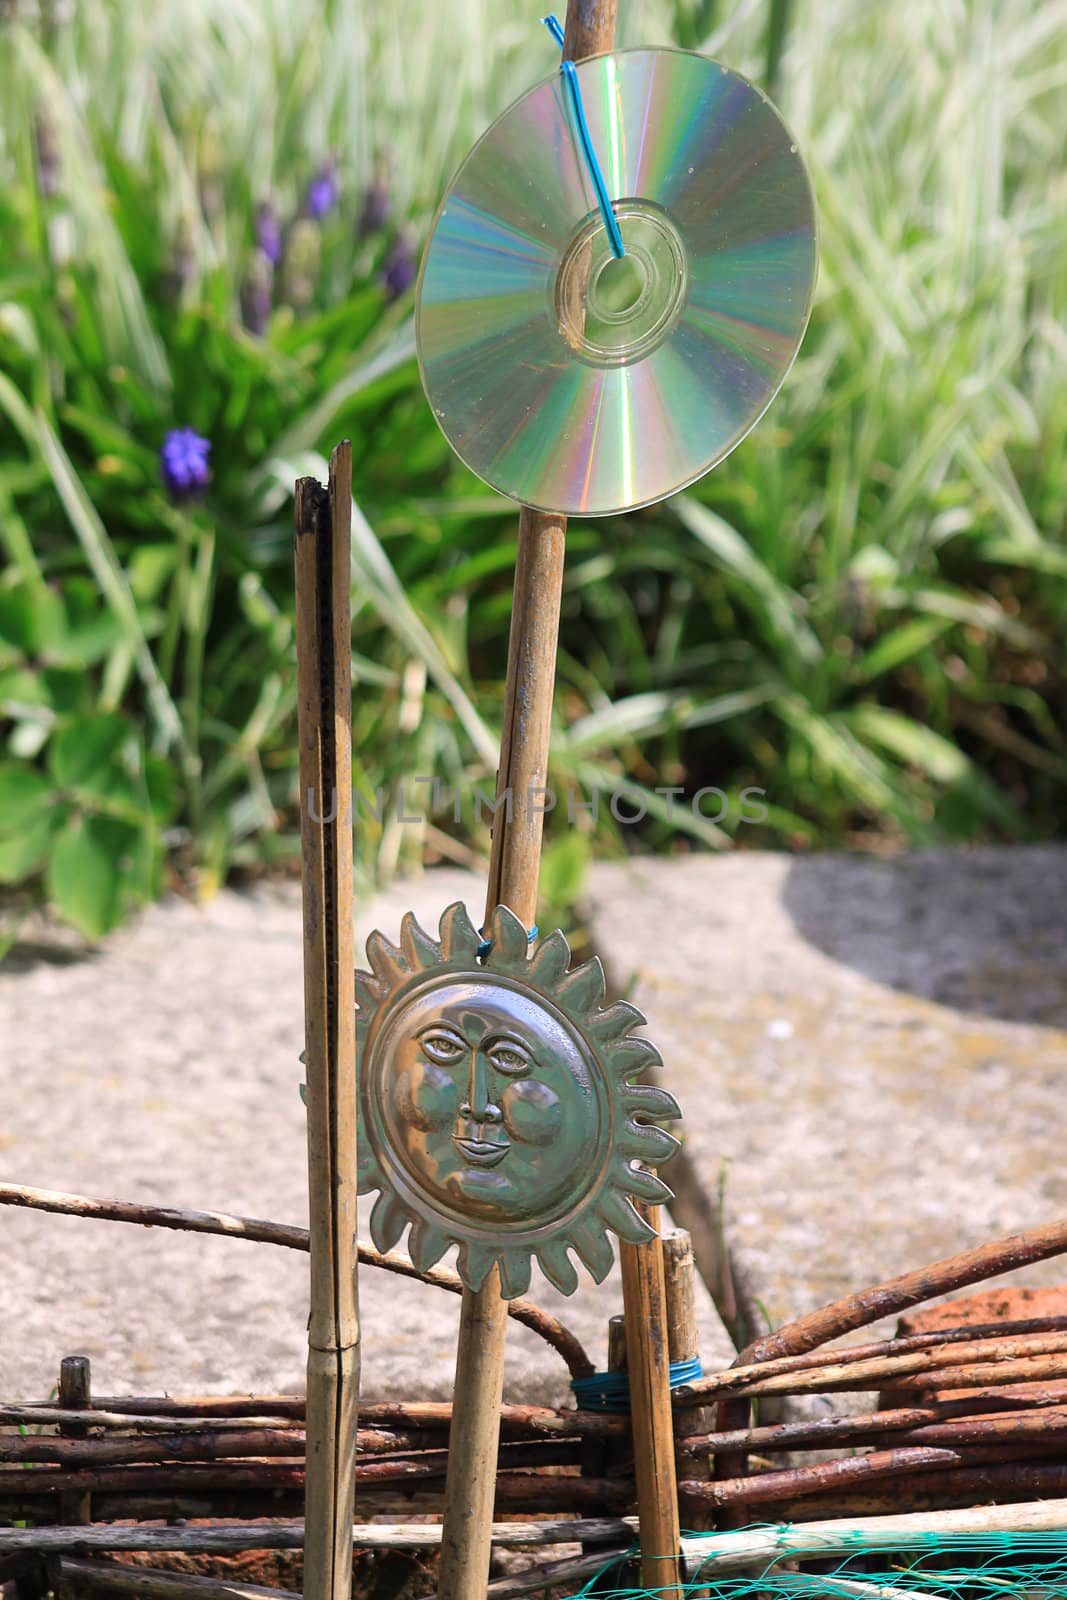 A home made bird scarer set over an urban garden vegetable patch. A discarded CD disk and a round tin sun shaped disk are tied to a bamboo pole.